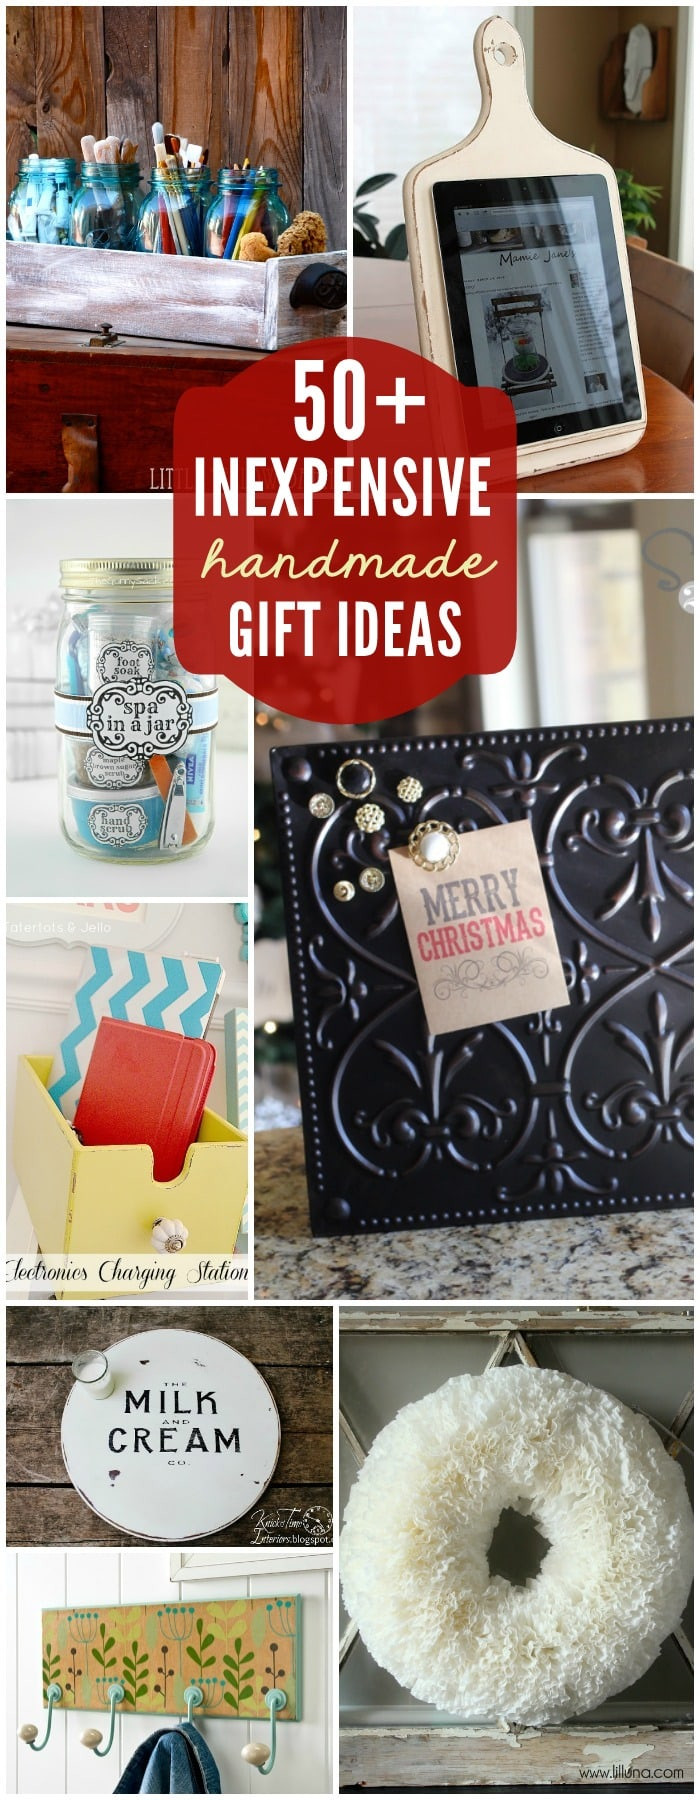 Cheap Kids Gifts
 75 DIY Gifts For Kids